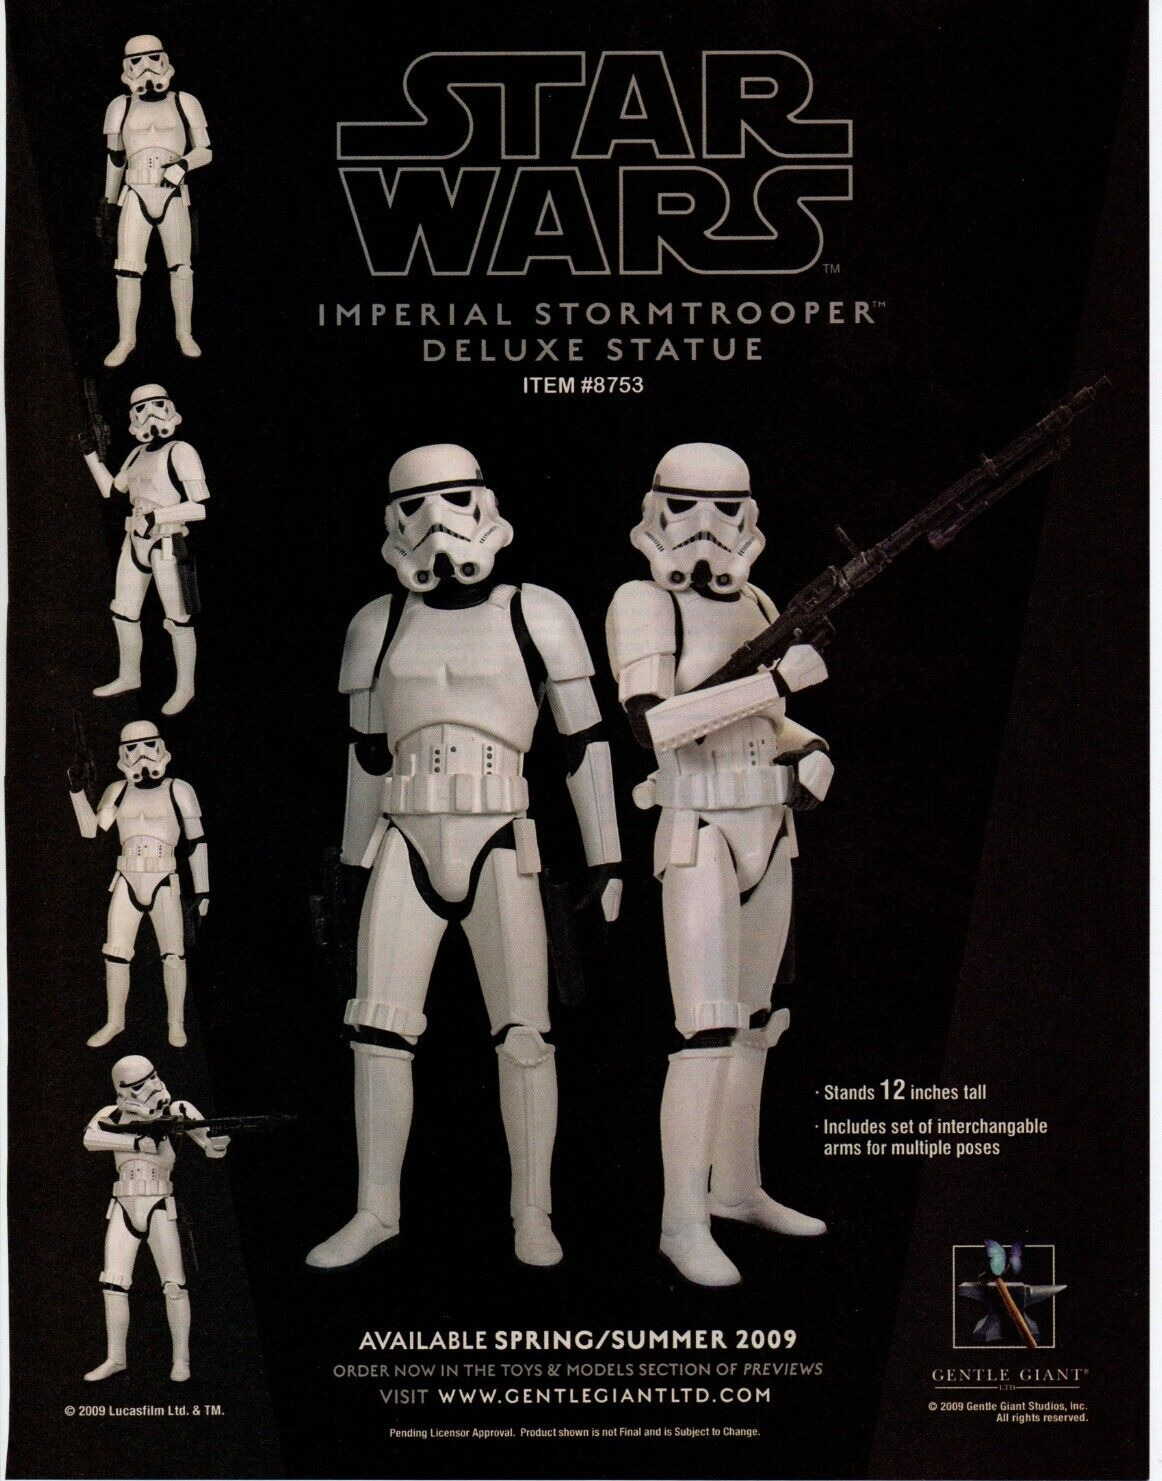 2009 GENTLE GIANT Action Figure Statue PRINT AD  STAR WARS IMPERIAL STORMTROOPER